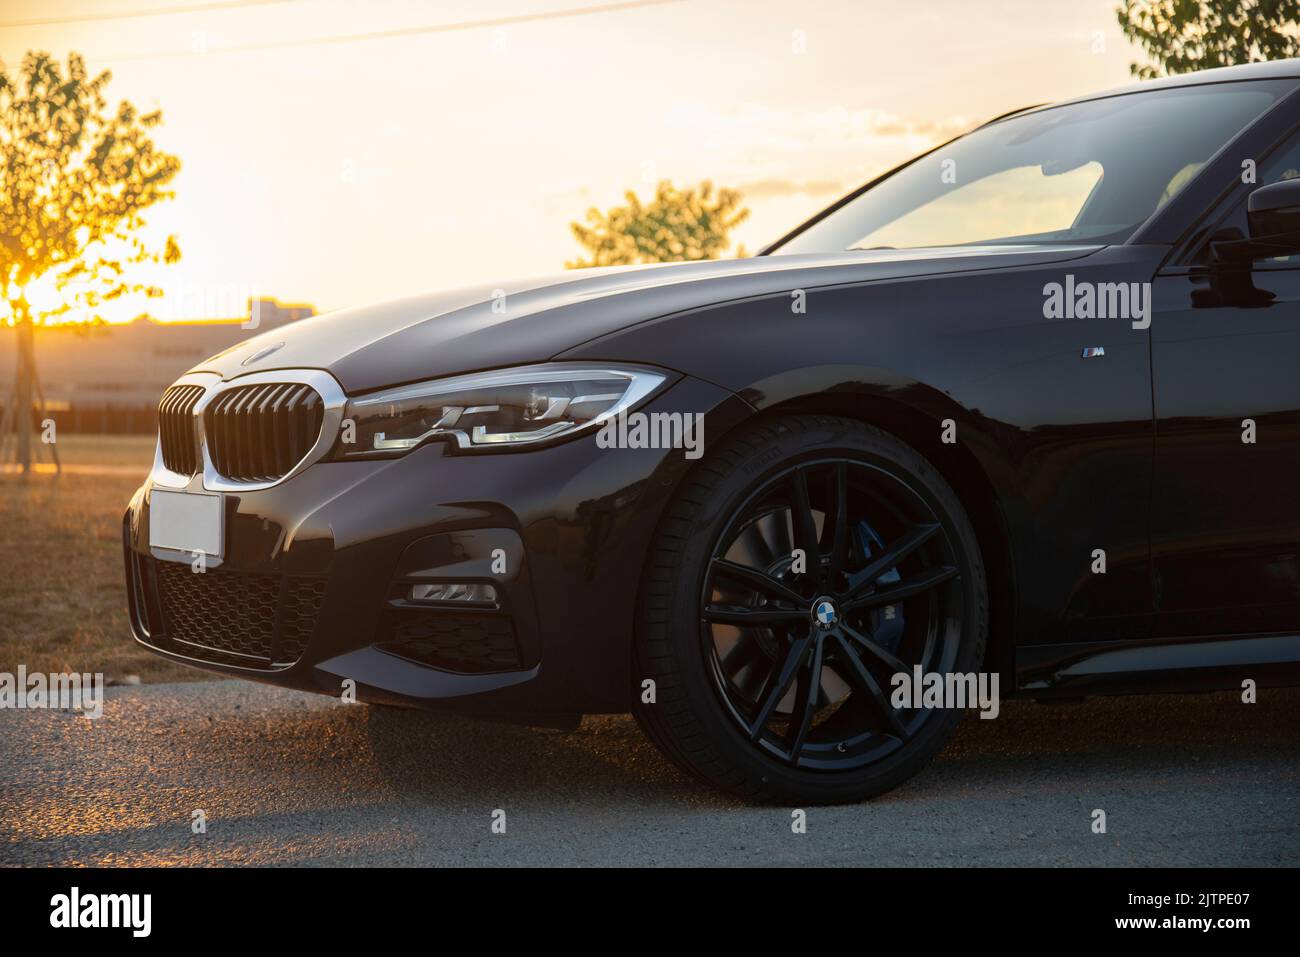 BMW 320d Touring M Sport (F31) front Stock Photo - Alamy